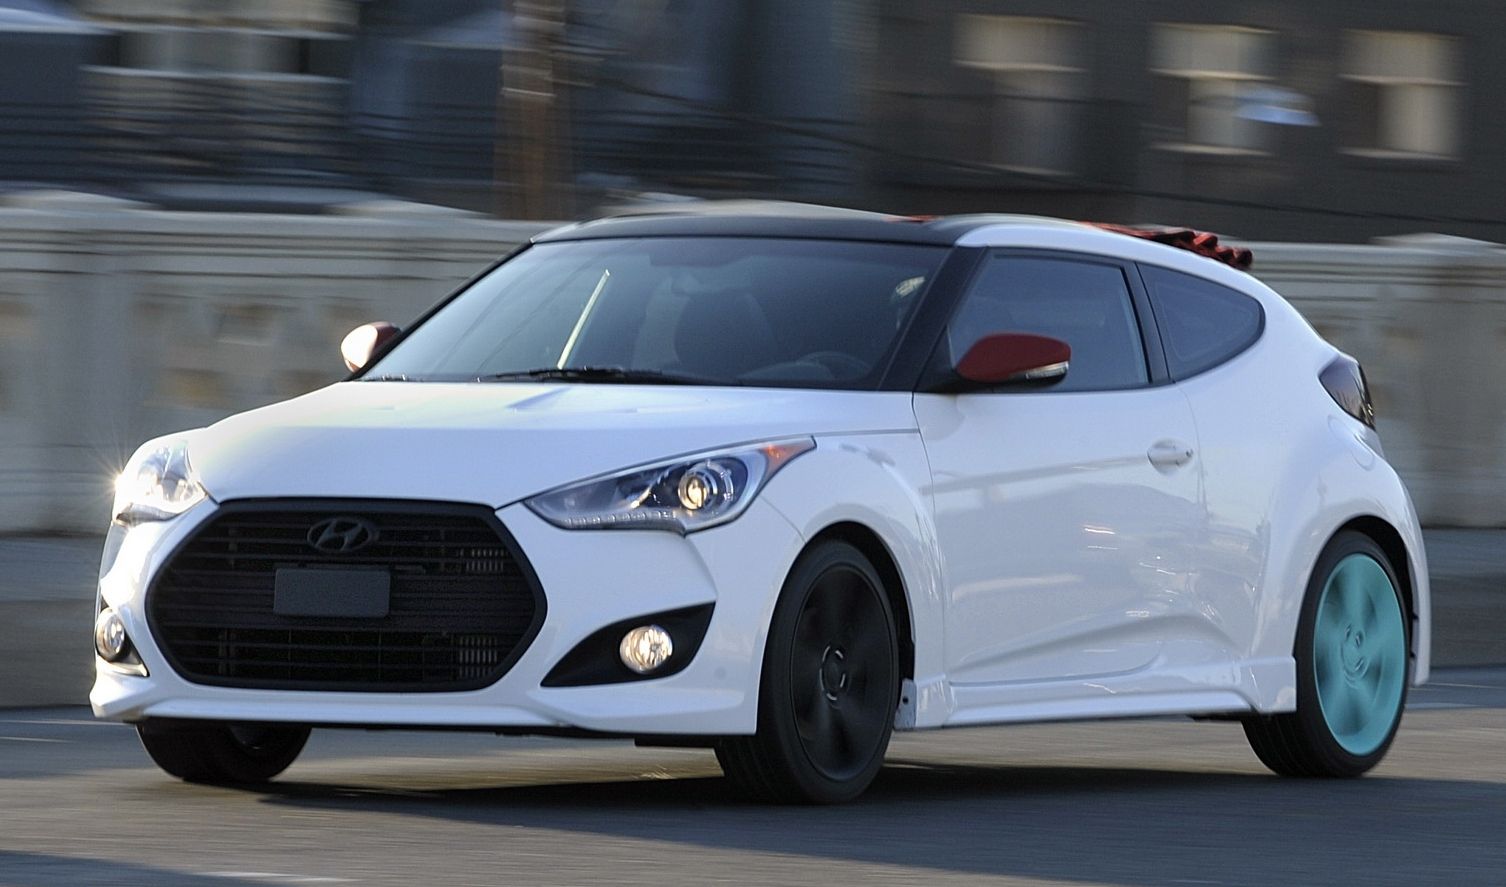 2013 Hyundai Veloster C3 Roll Top Concept